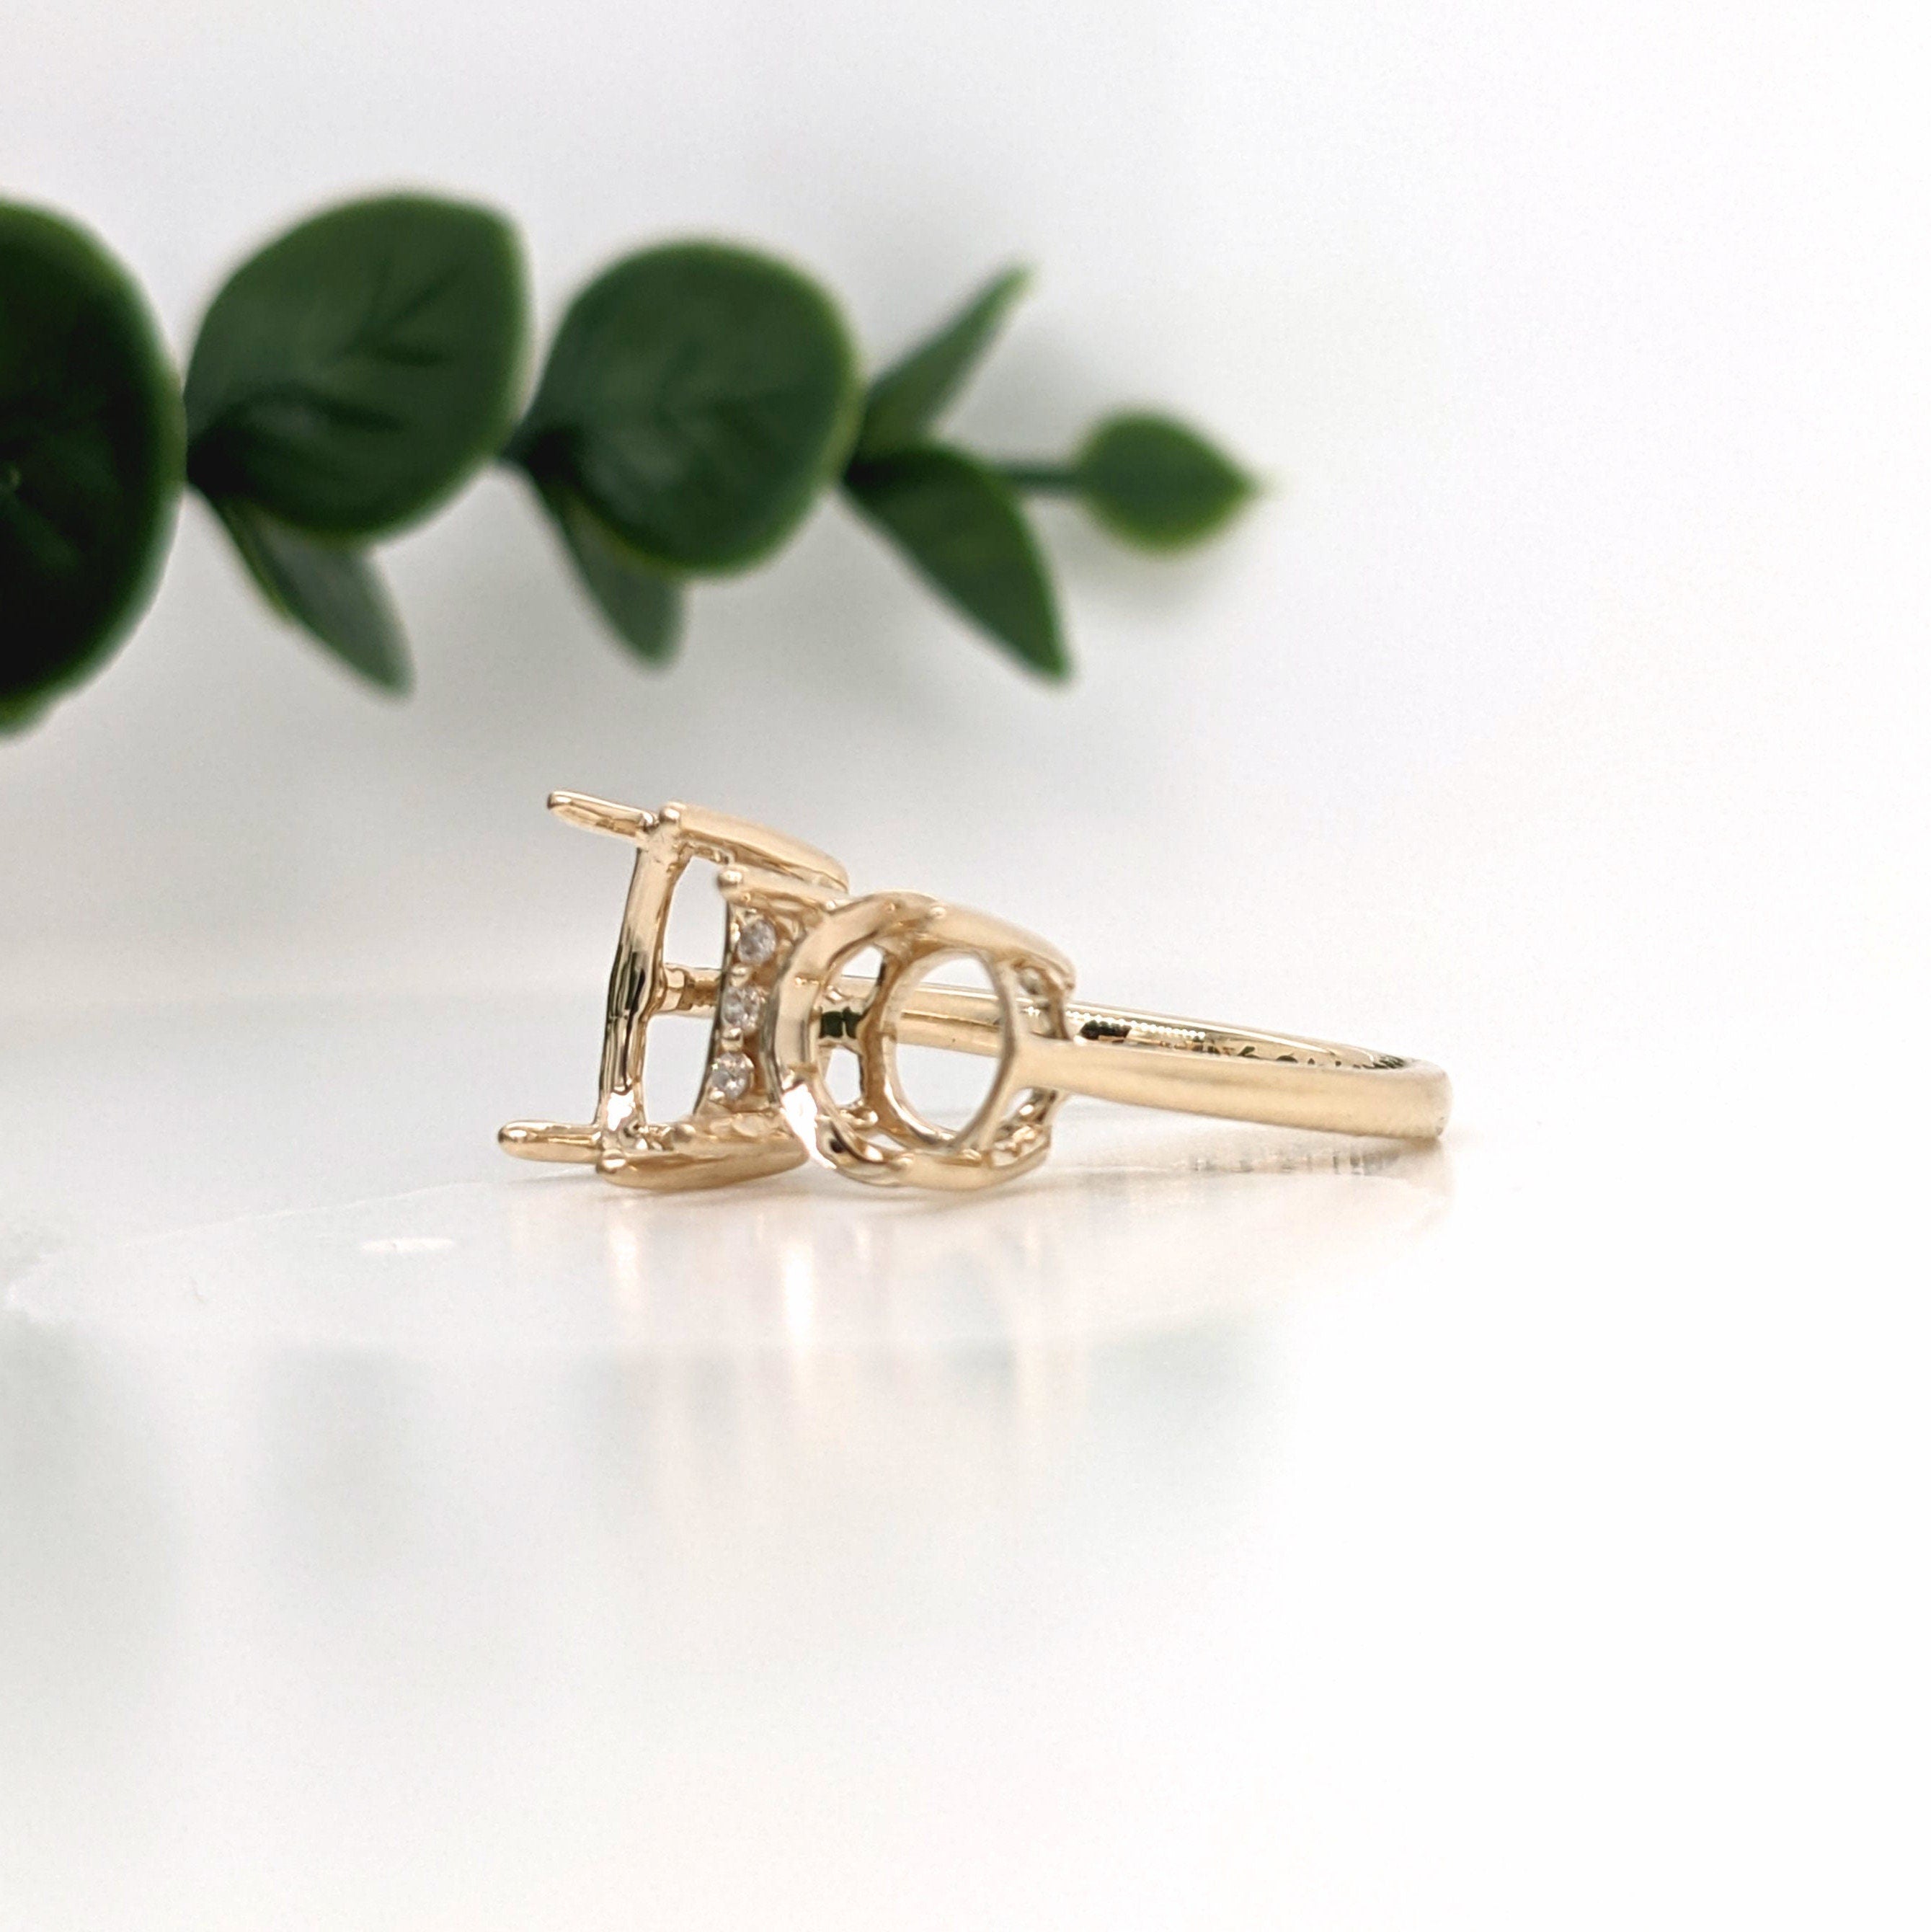 Unique Two Stone Ring Setting in Solid 14K Gold | 2 Birthstone Ring | 'Toi et Moi' 'Forever Us' Mount | Couples Ring | 9x5mm 7mm Gemstones